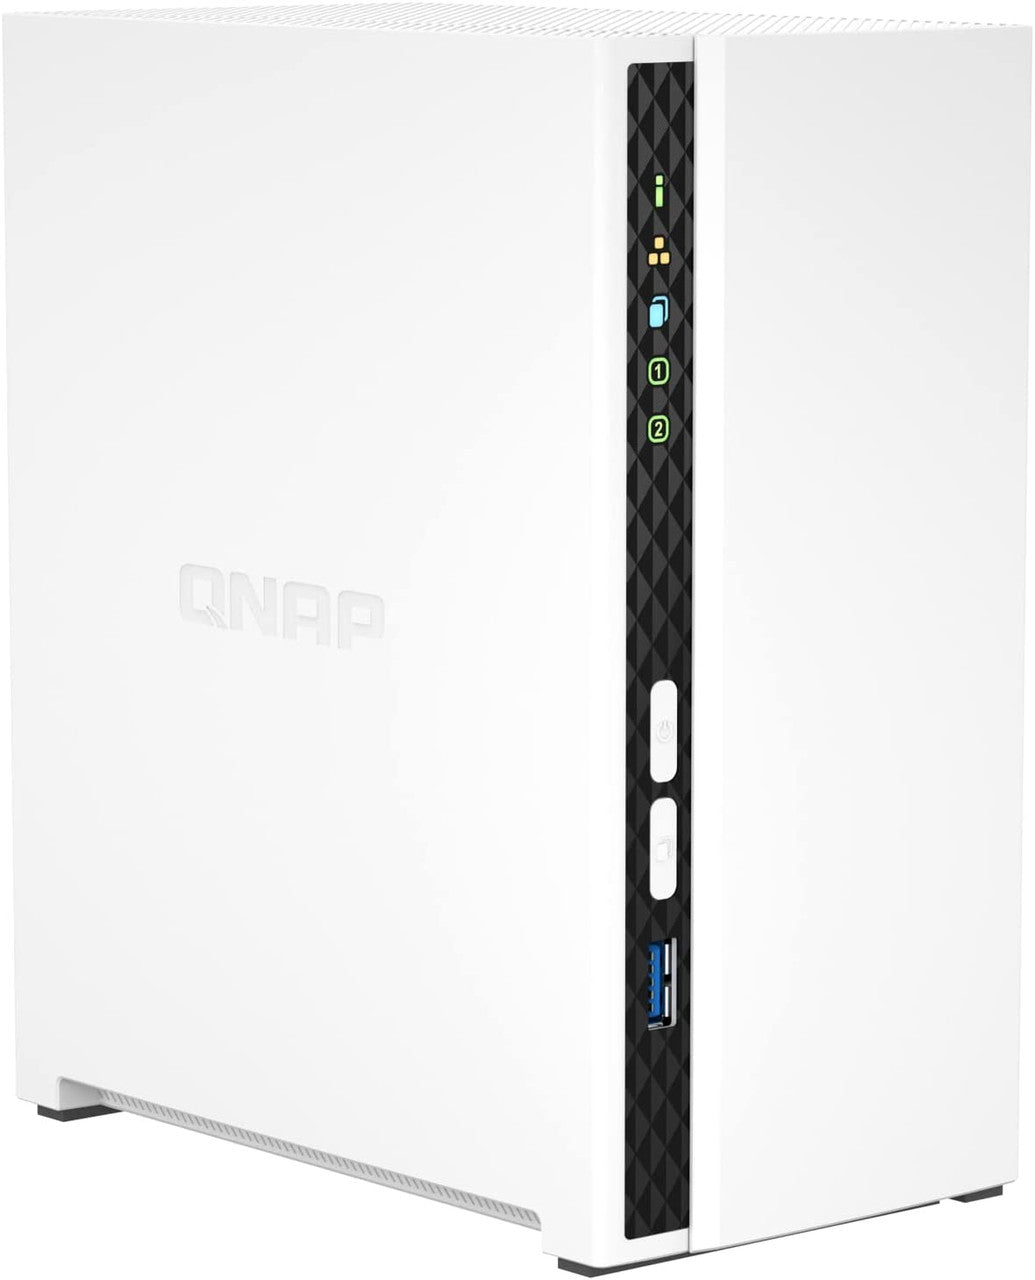 QNAP TS-233 2-Bay Desktop NAS with a 20TB (2 x 10TB) of Seagate Ironwolf NAS Drives Fully Assembled and Tested